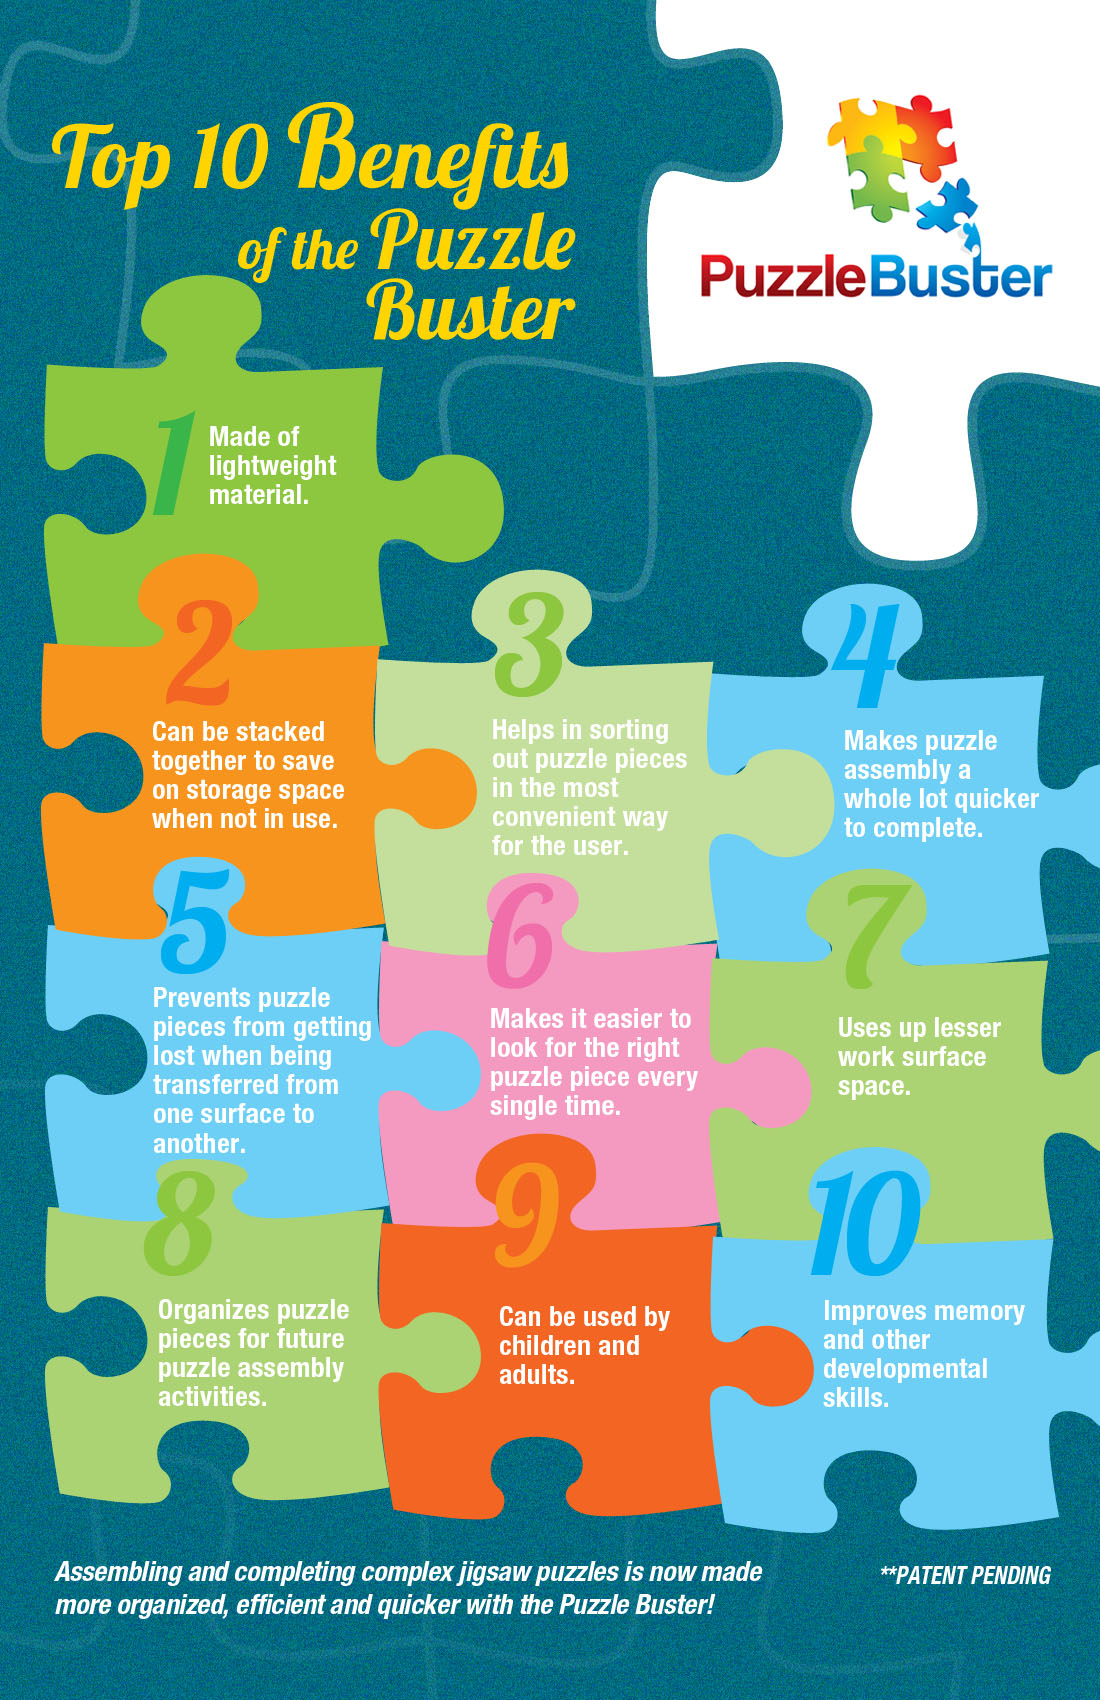 The Puzzle Buster is an invention that allows people to have fun in a manageable time frame.